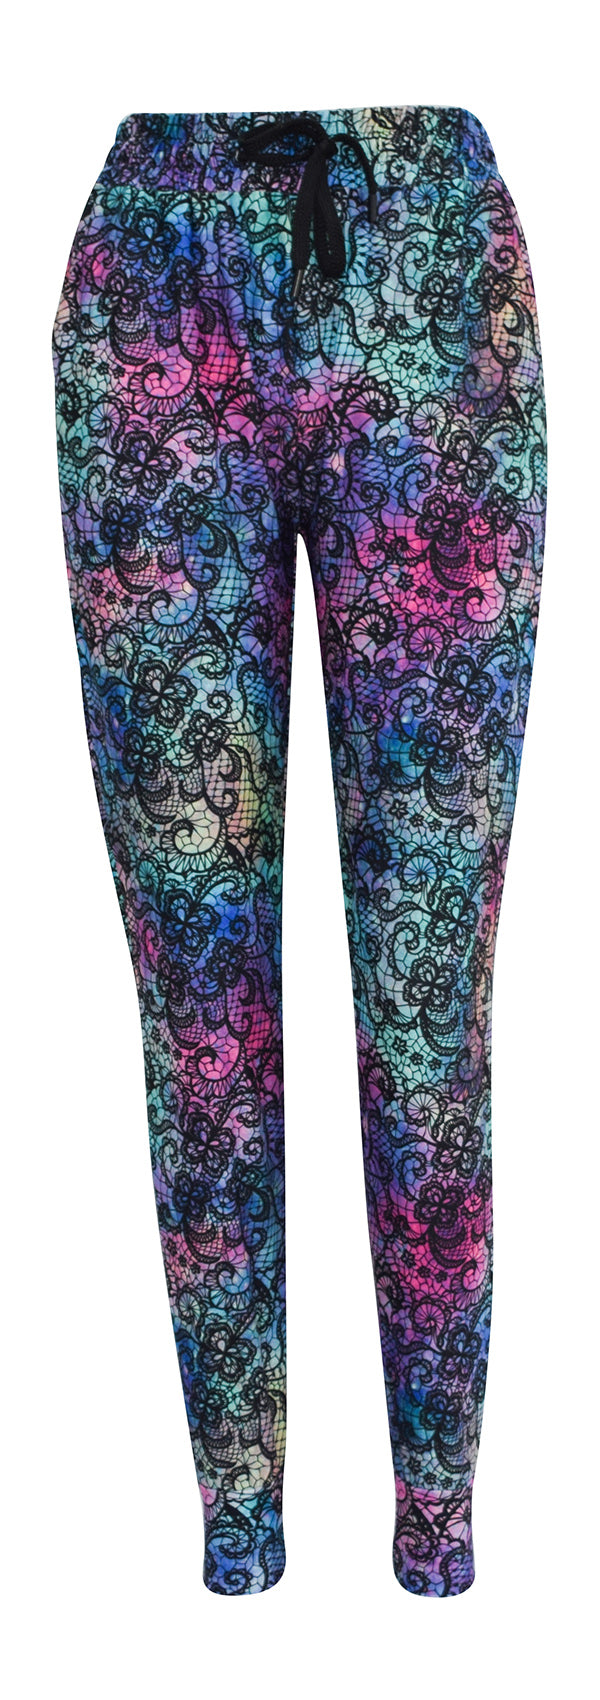 Rainbow Lace Lejoggers-Joggers